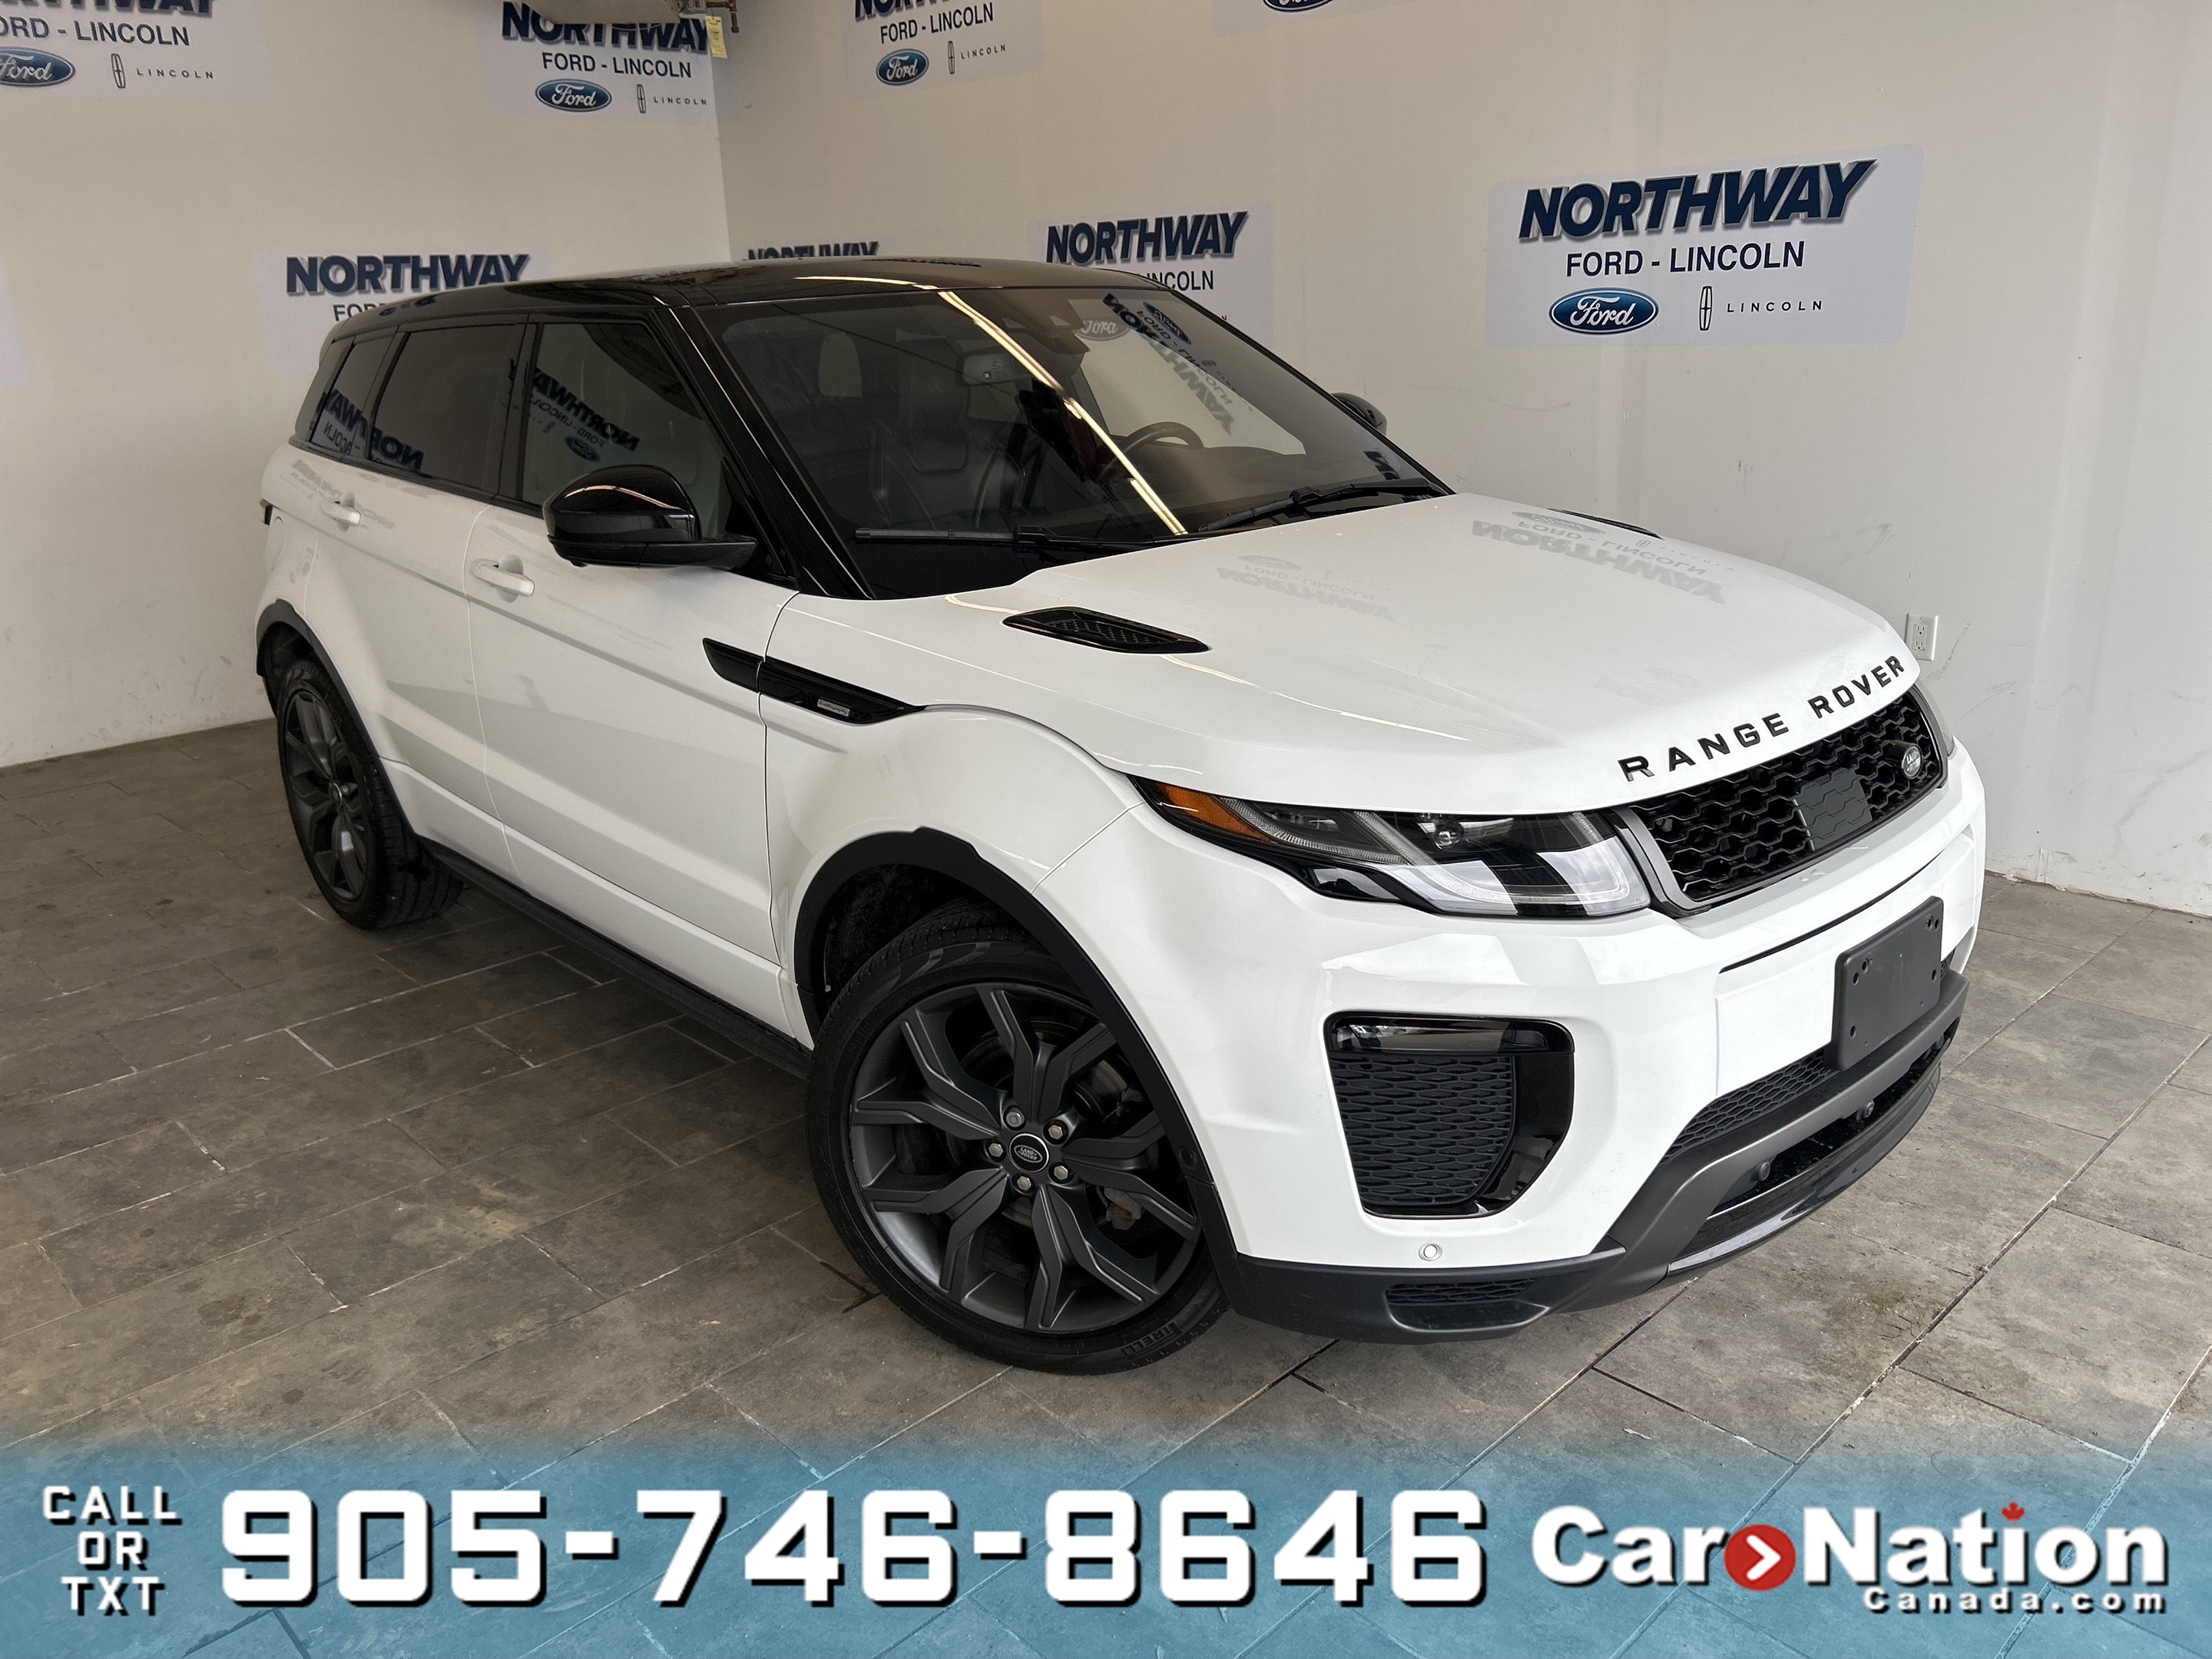 2017 Land Rover Range Rover Evoque AUTOBIOGRAPHY | 4X4 | PANO ROOF | LEATHER | NAV